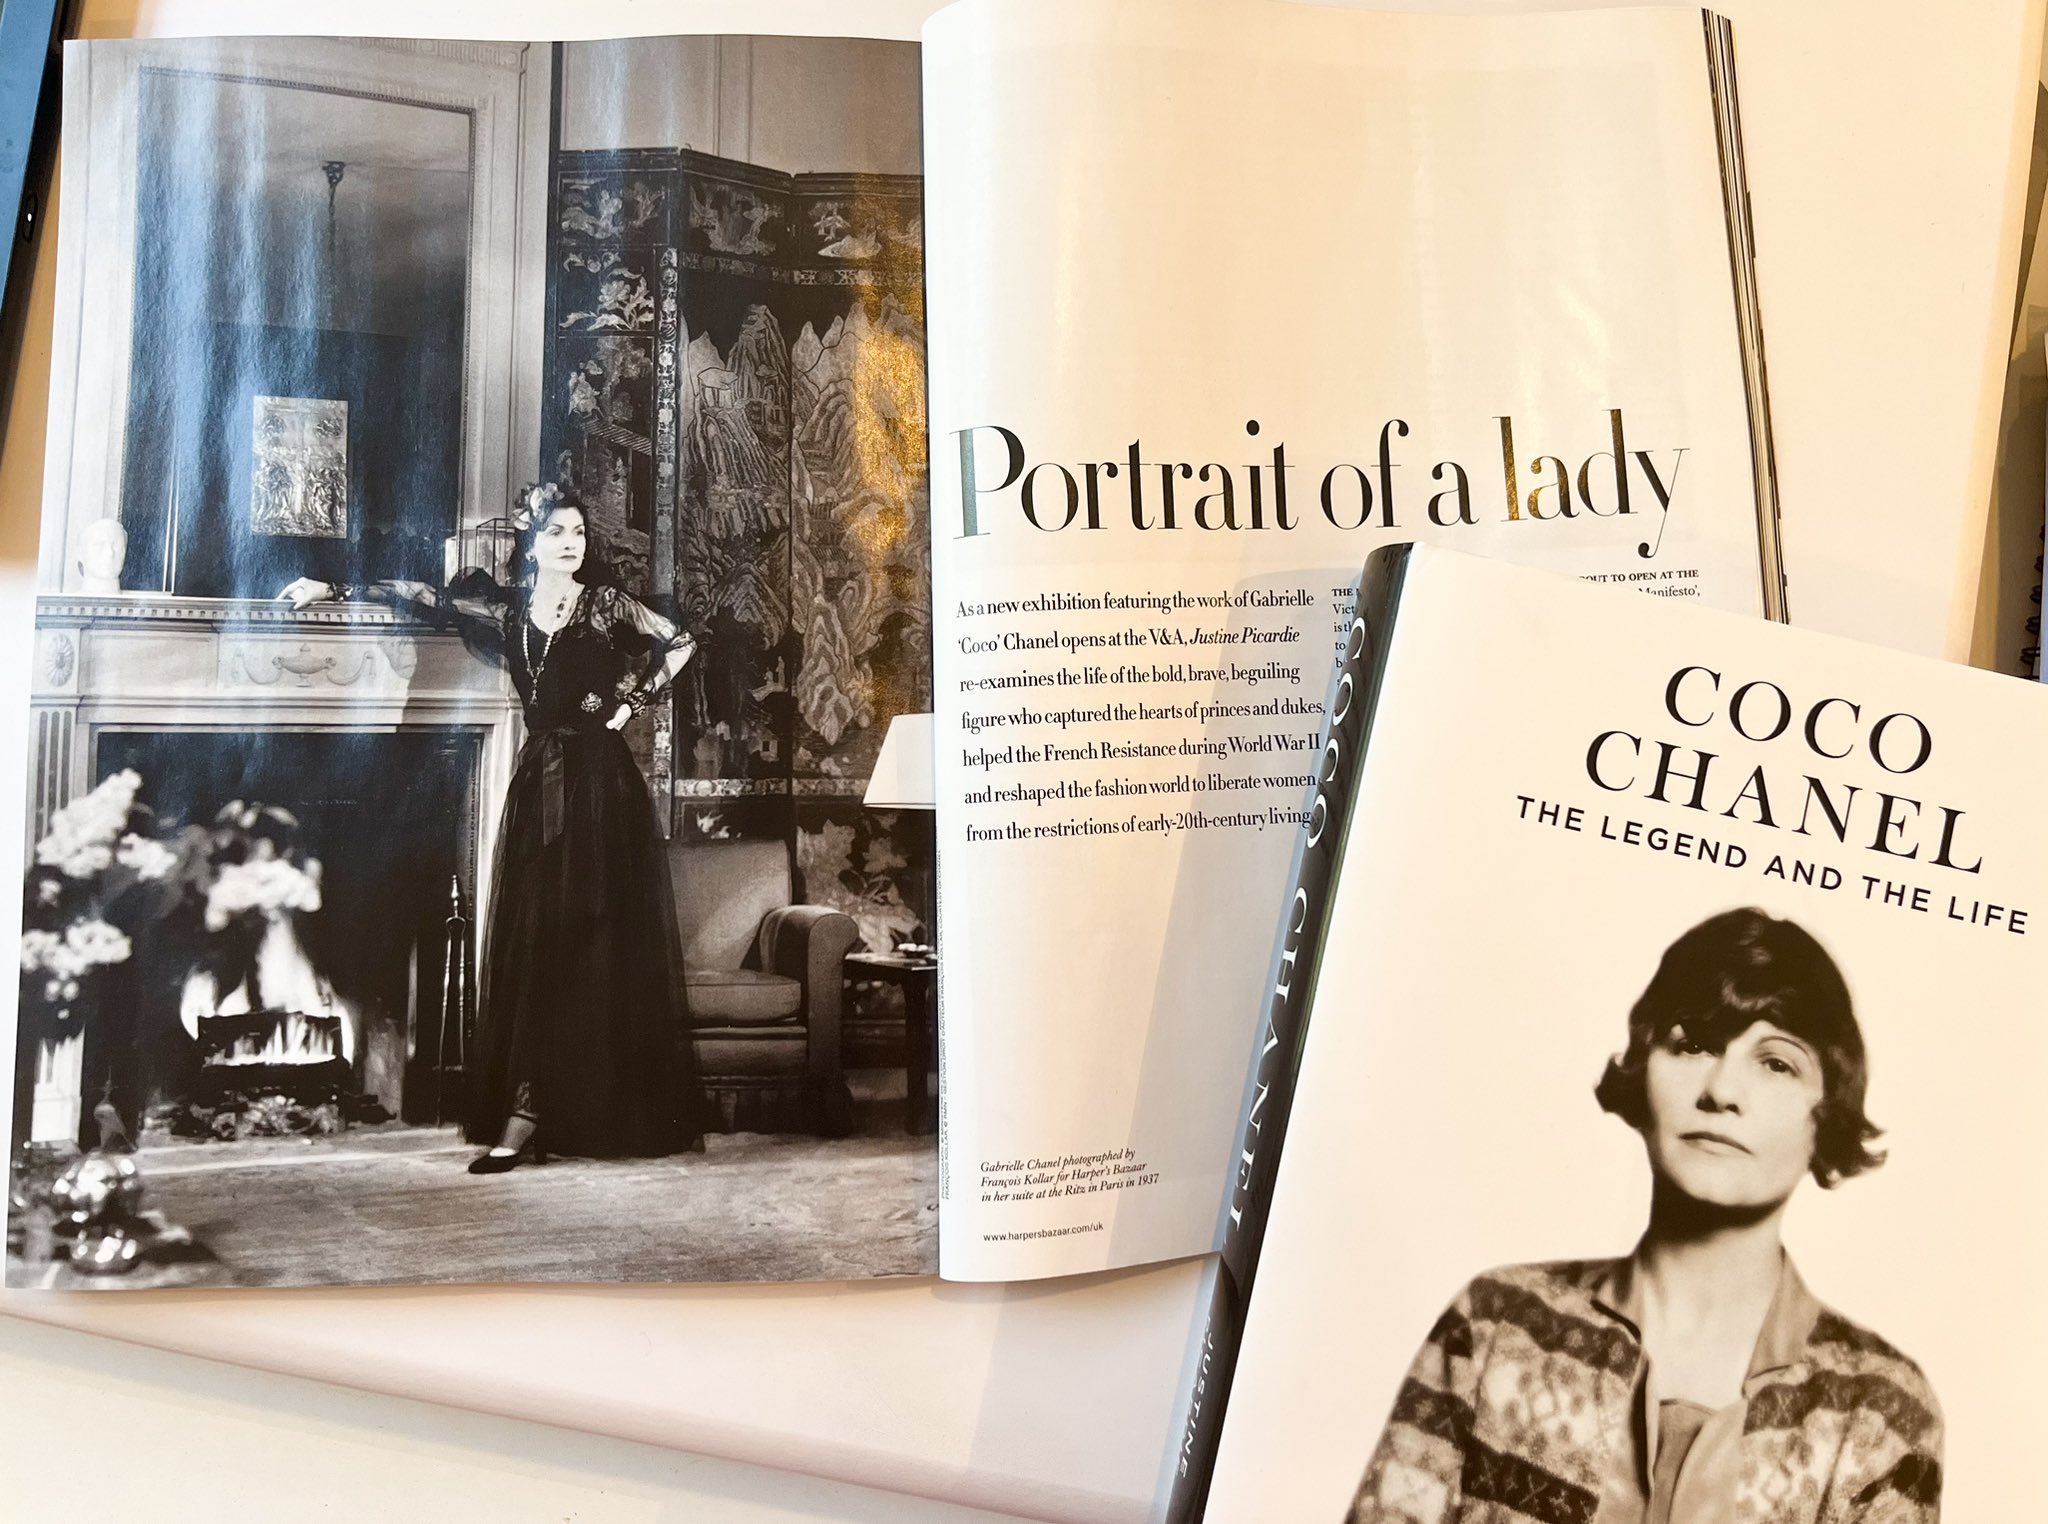 New 'Coco Chanel' Book by Justine Picardie Explores Gabrielle Chanel